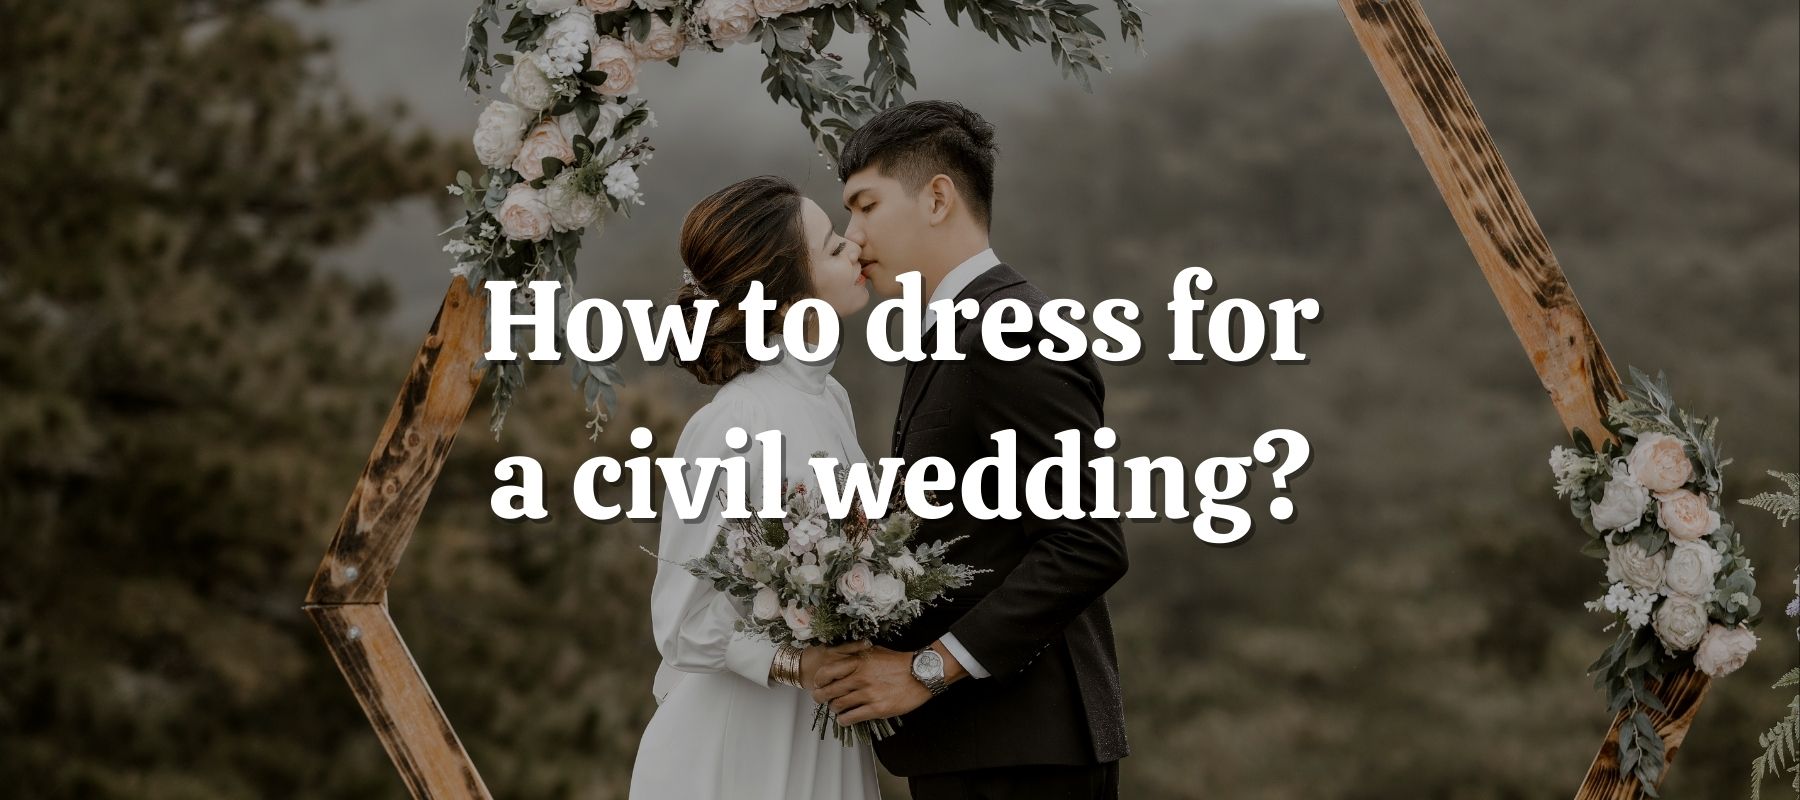 How to dress for a civil wedding?